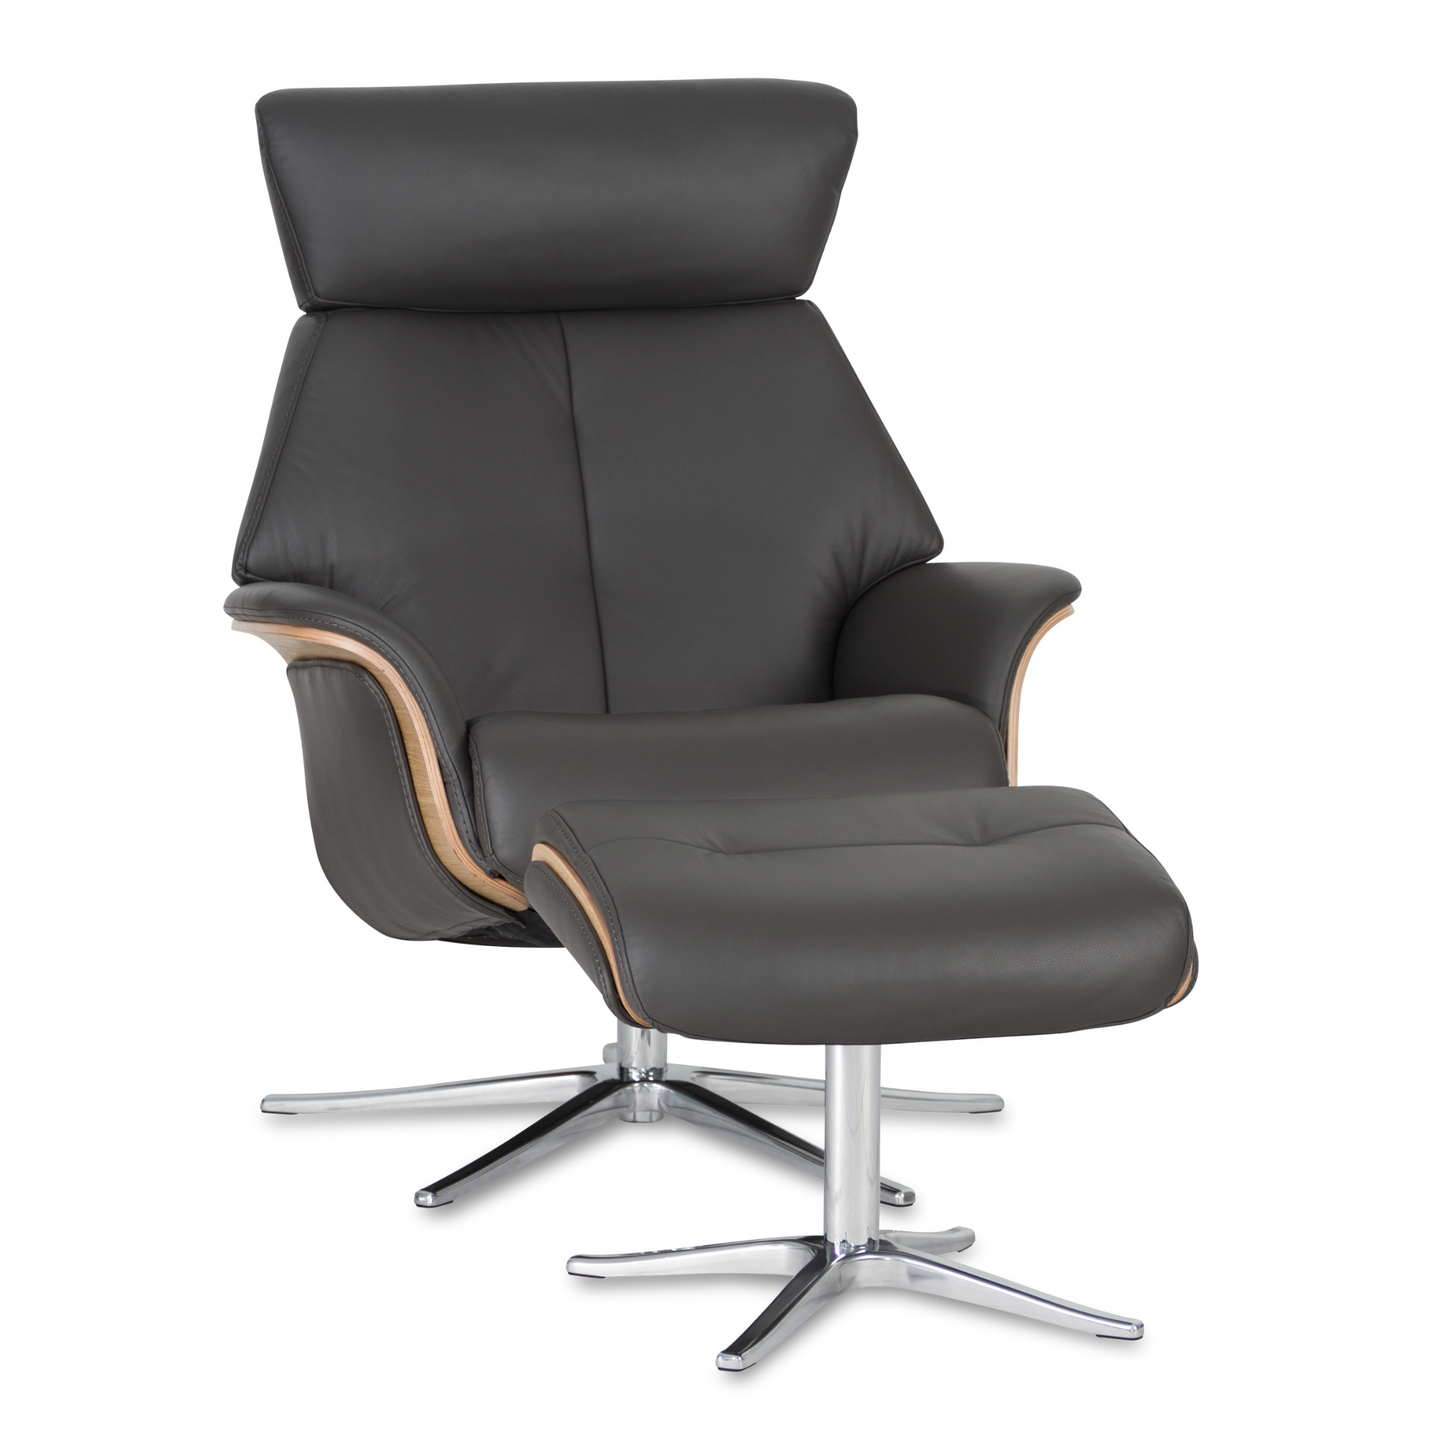 Space 57.57 Recliner Chair with Ottoman by IMG